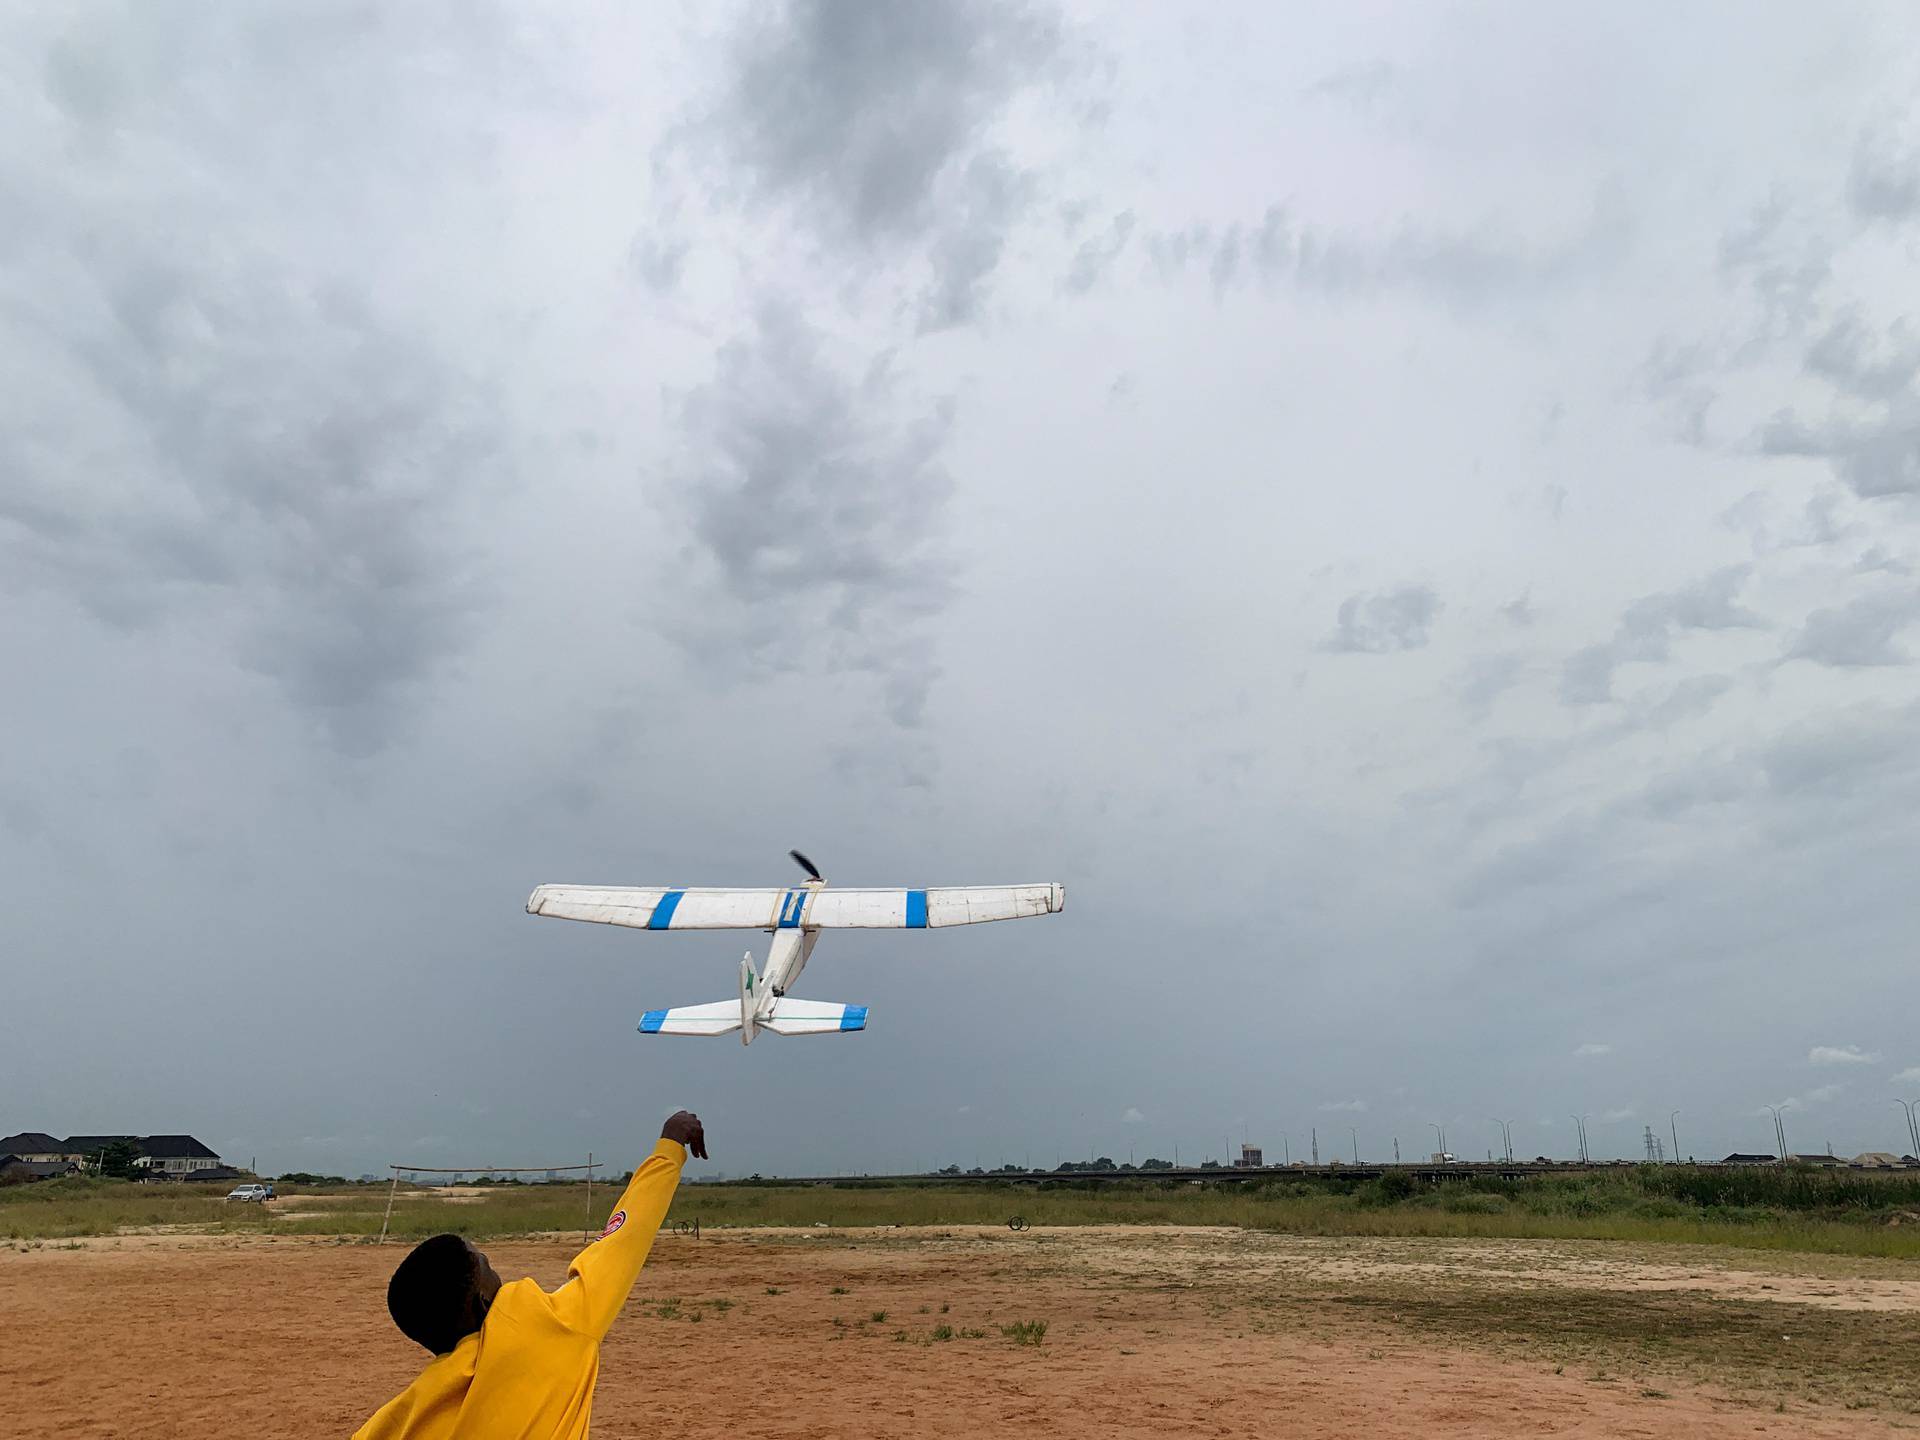 Damilare Ajayi, a friend of Bolaji Fatai, who built the model aeroplane from discarded waste, launches the aeroplane into the sky, in Lagos